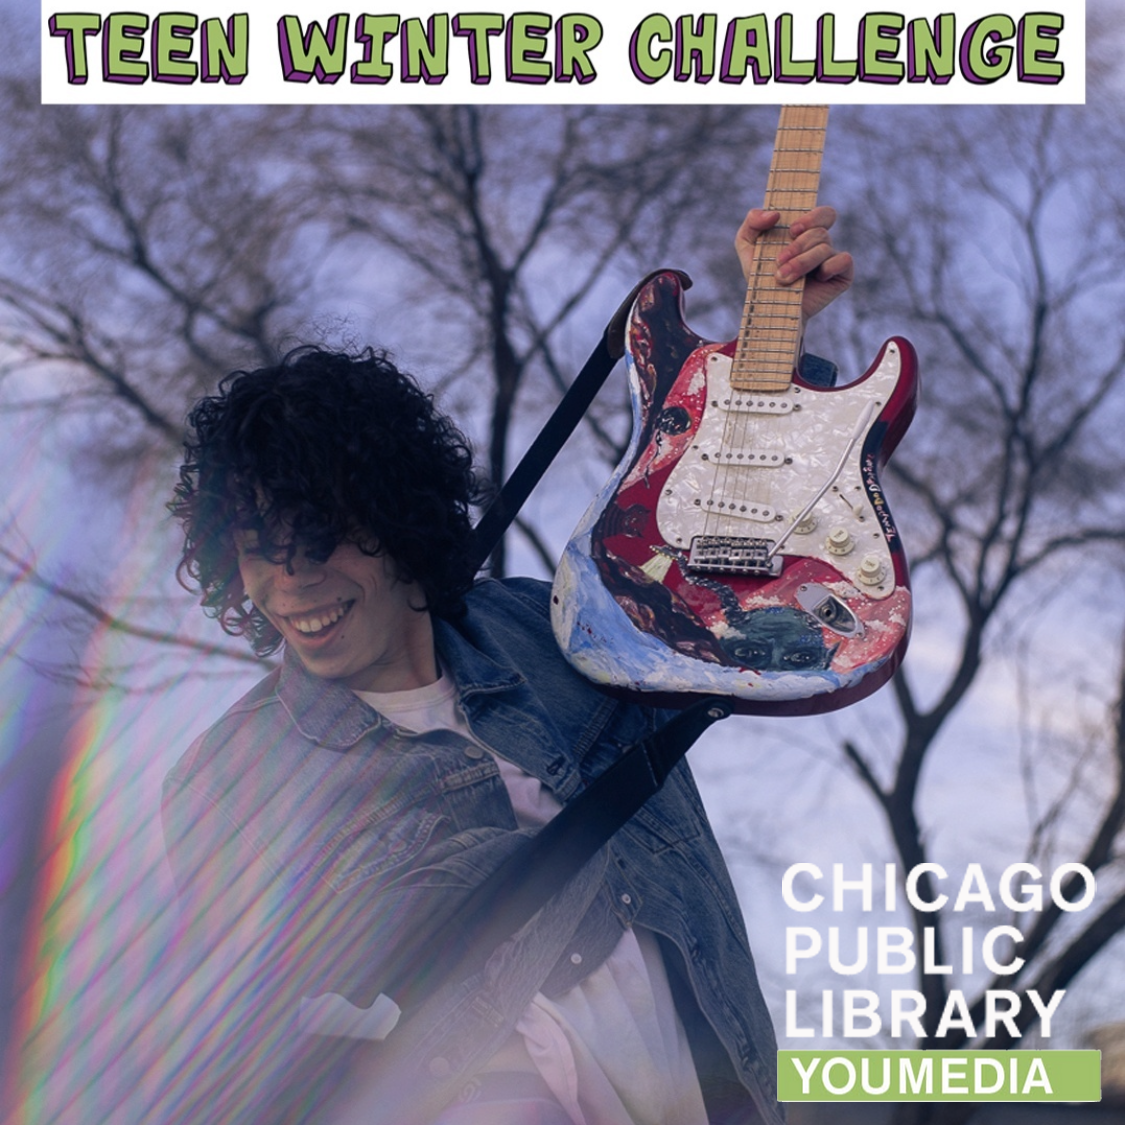 youmedia chicago, chicago public library, cpslives, teen winter challenge, open call, artist residency, chicago